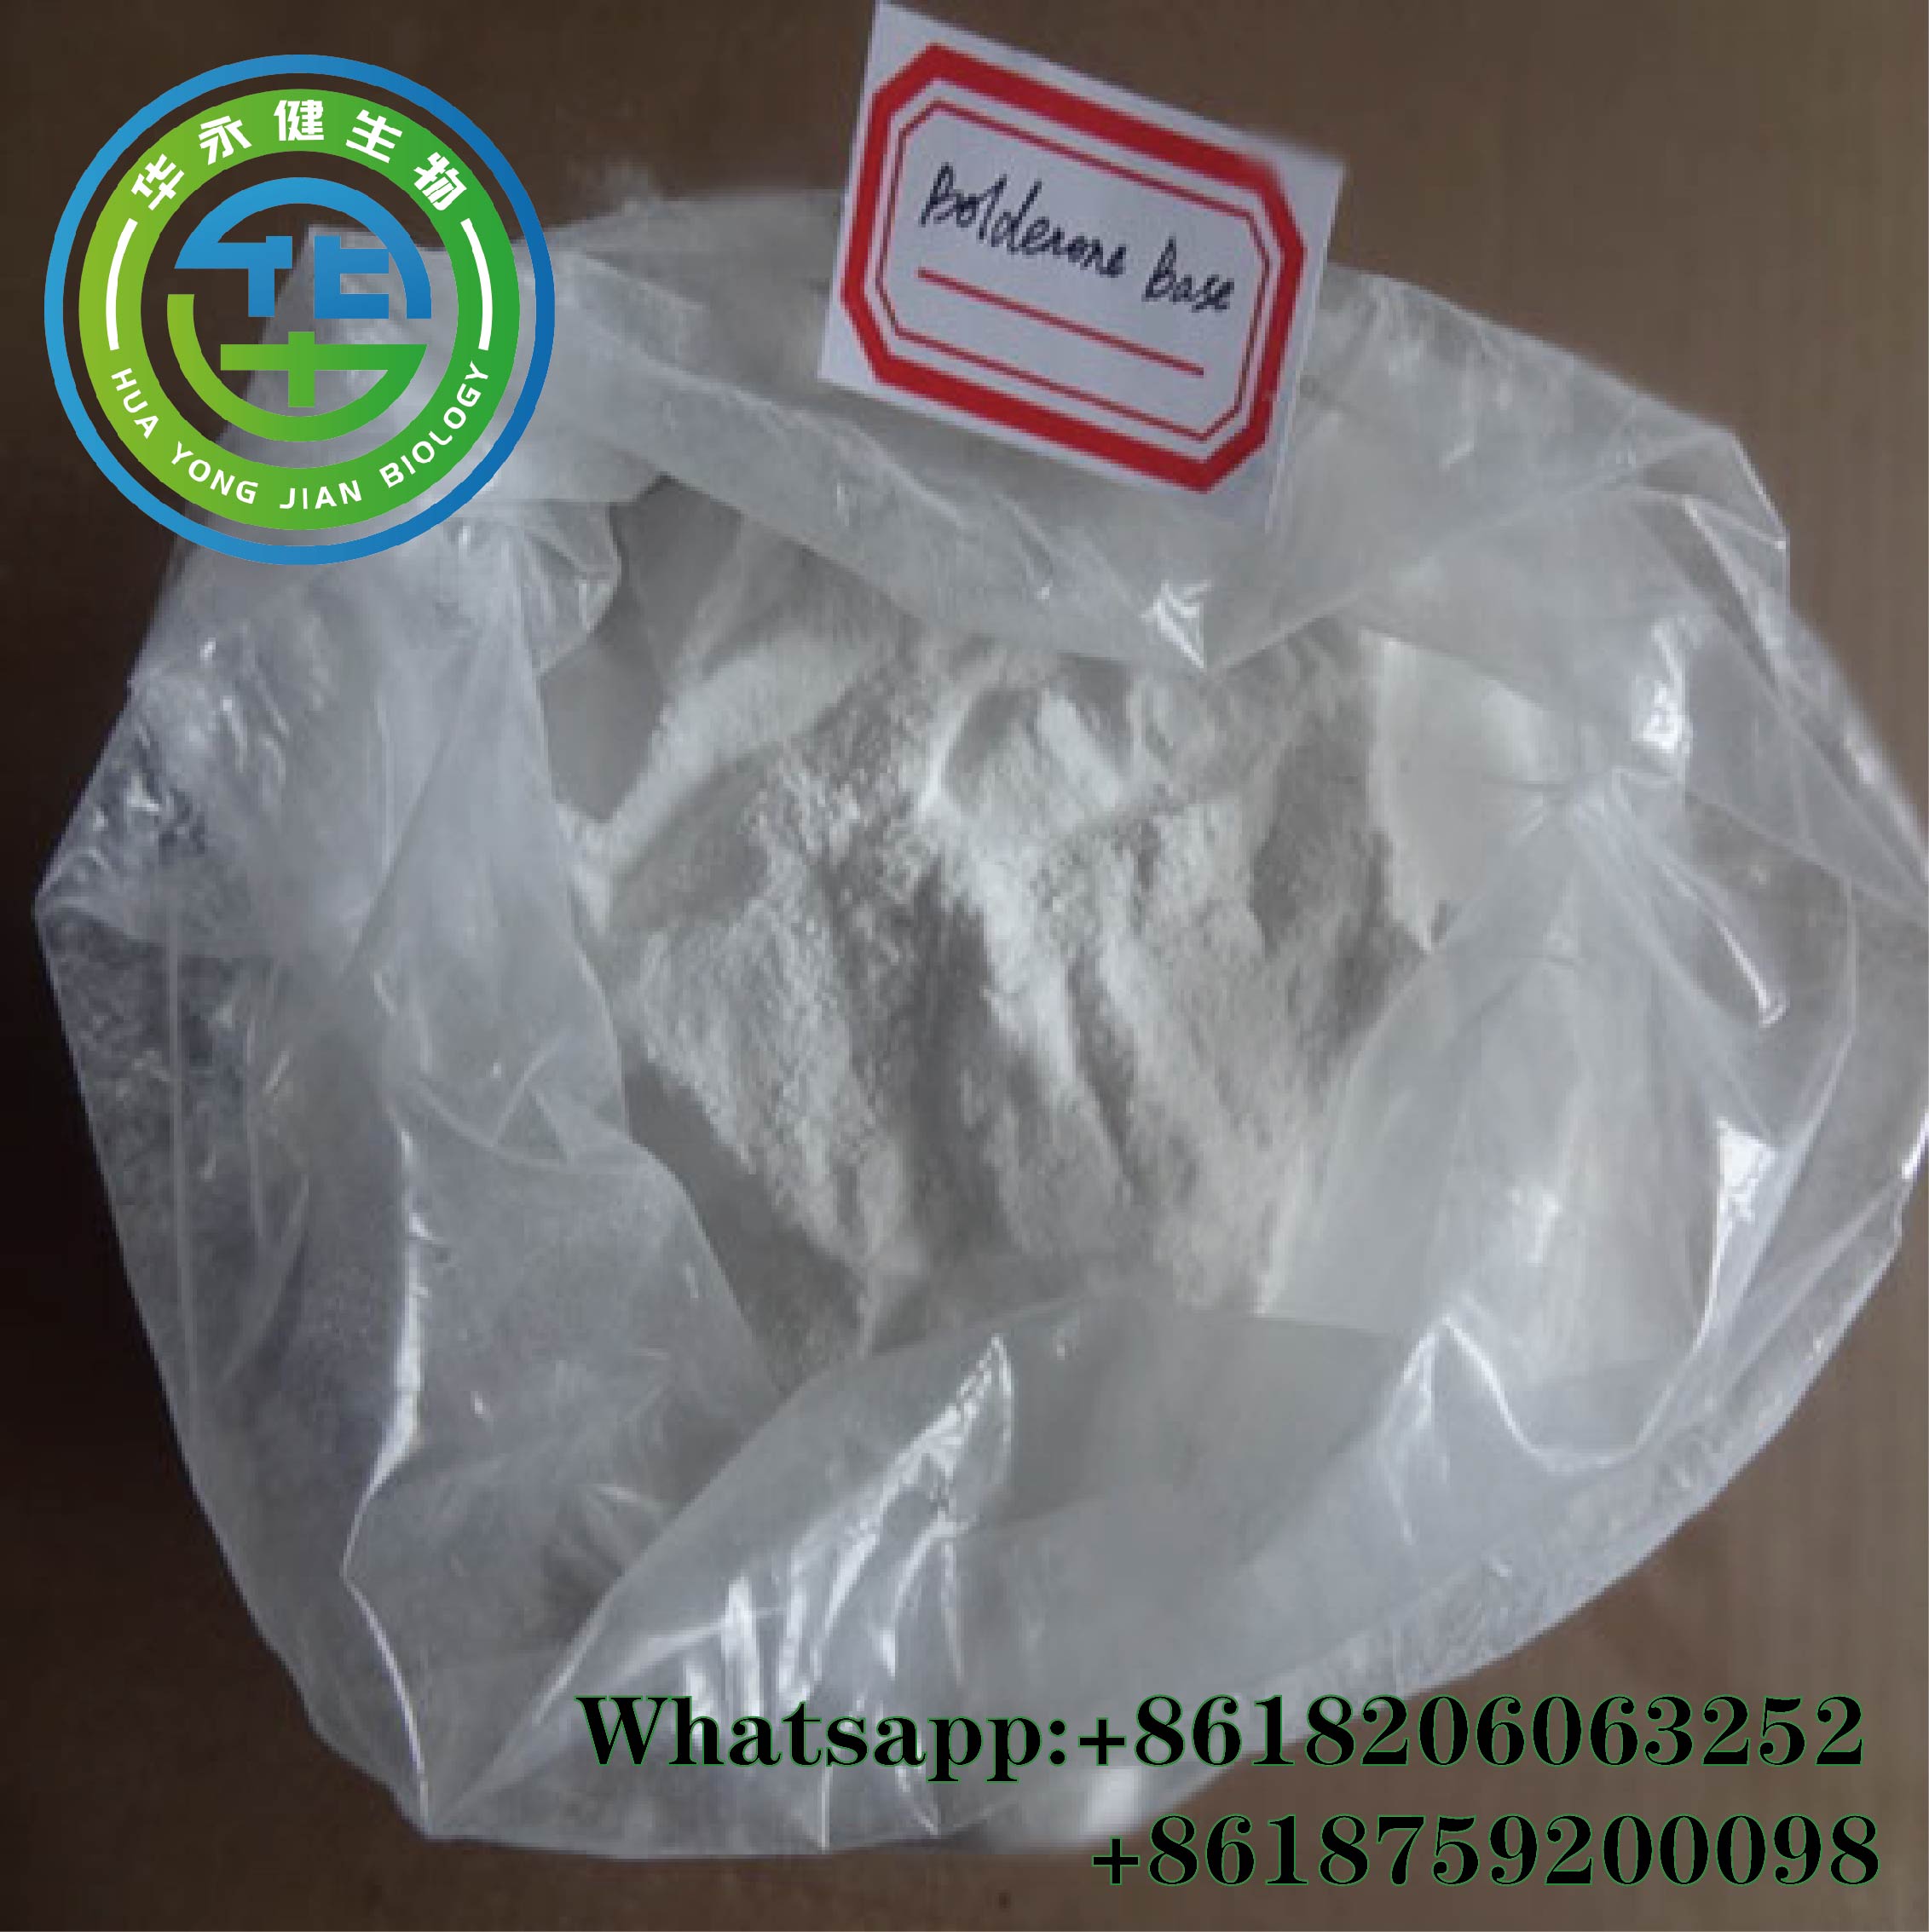 High Quality Boldenone Steroids Powder for Muscle Building with Wholesale Price CasNO.846-48-0